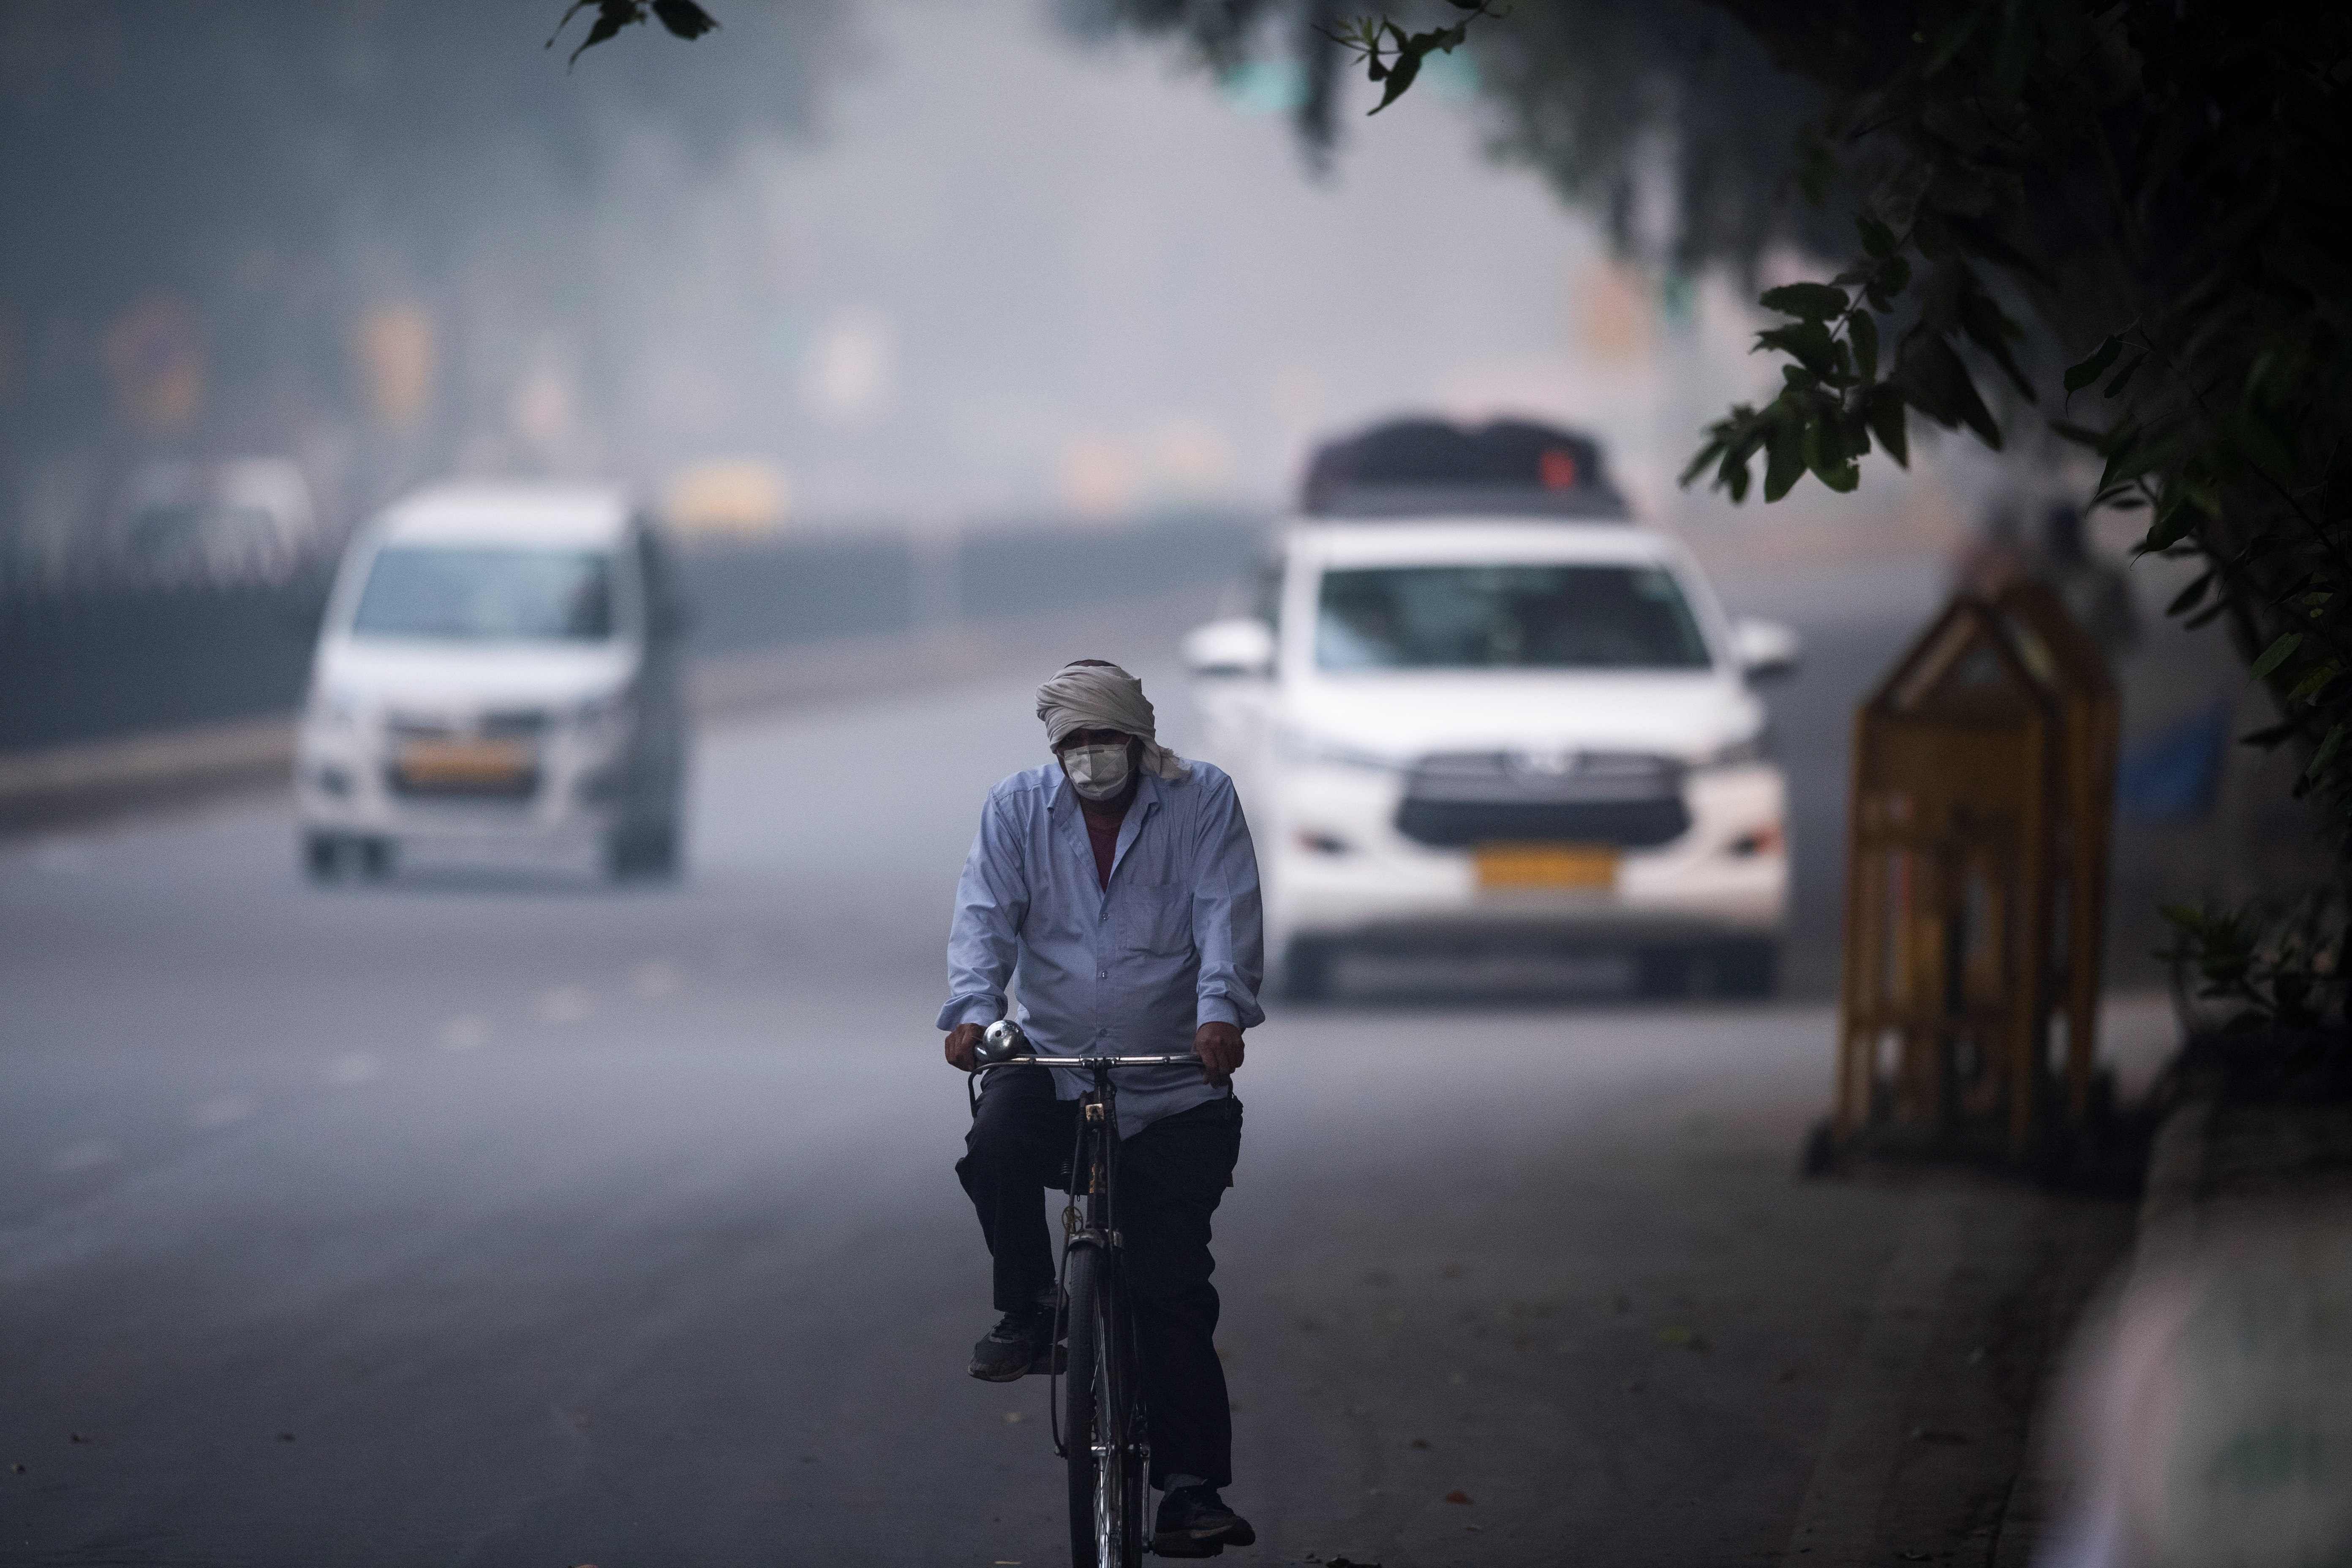 A man wearing protective face mask rides a bicycle along a street in smoggy conditions in New Delhi. (AFP Photo)